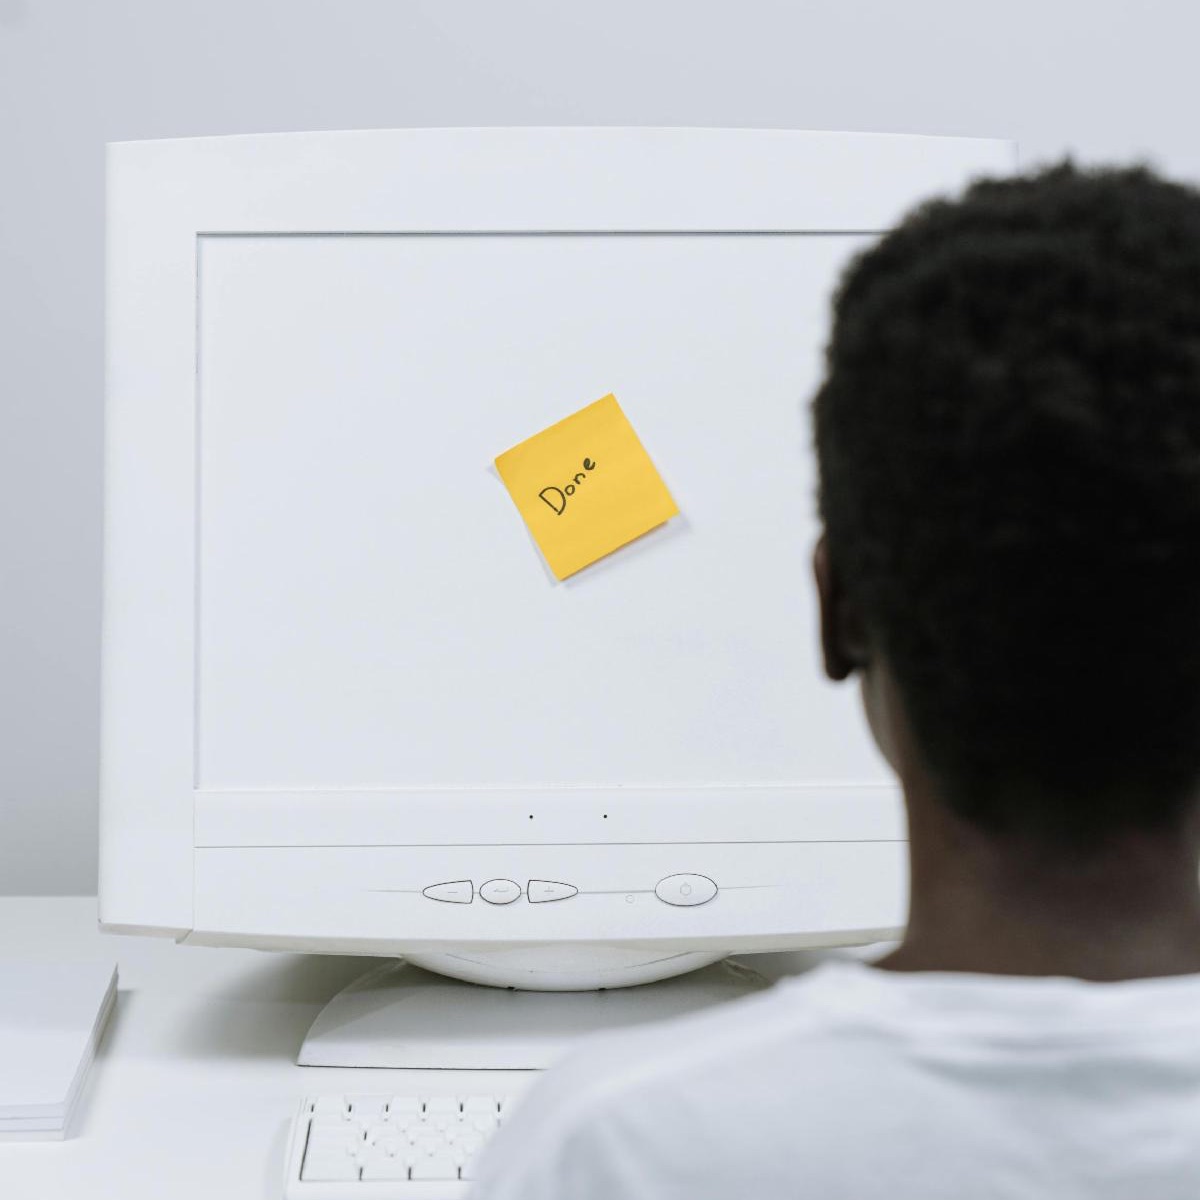 man looking at a computer with a post it on the screen that says, "done"